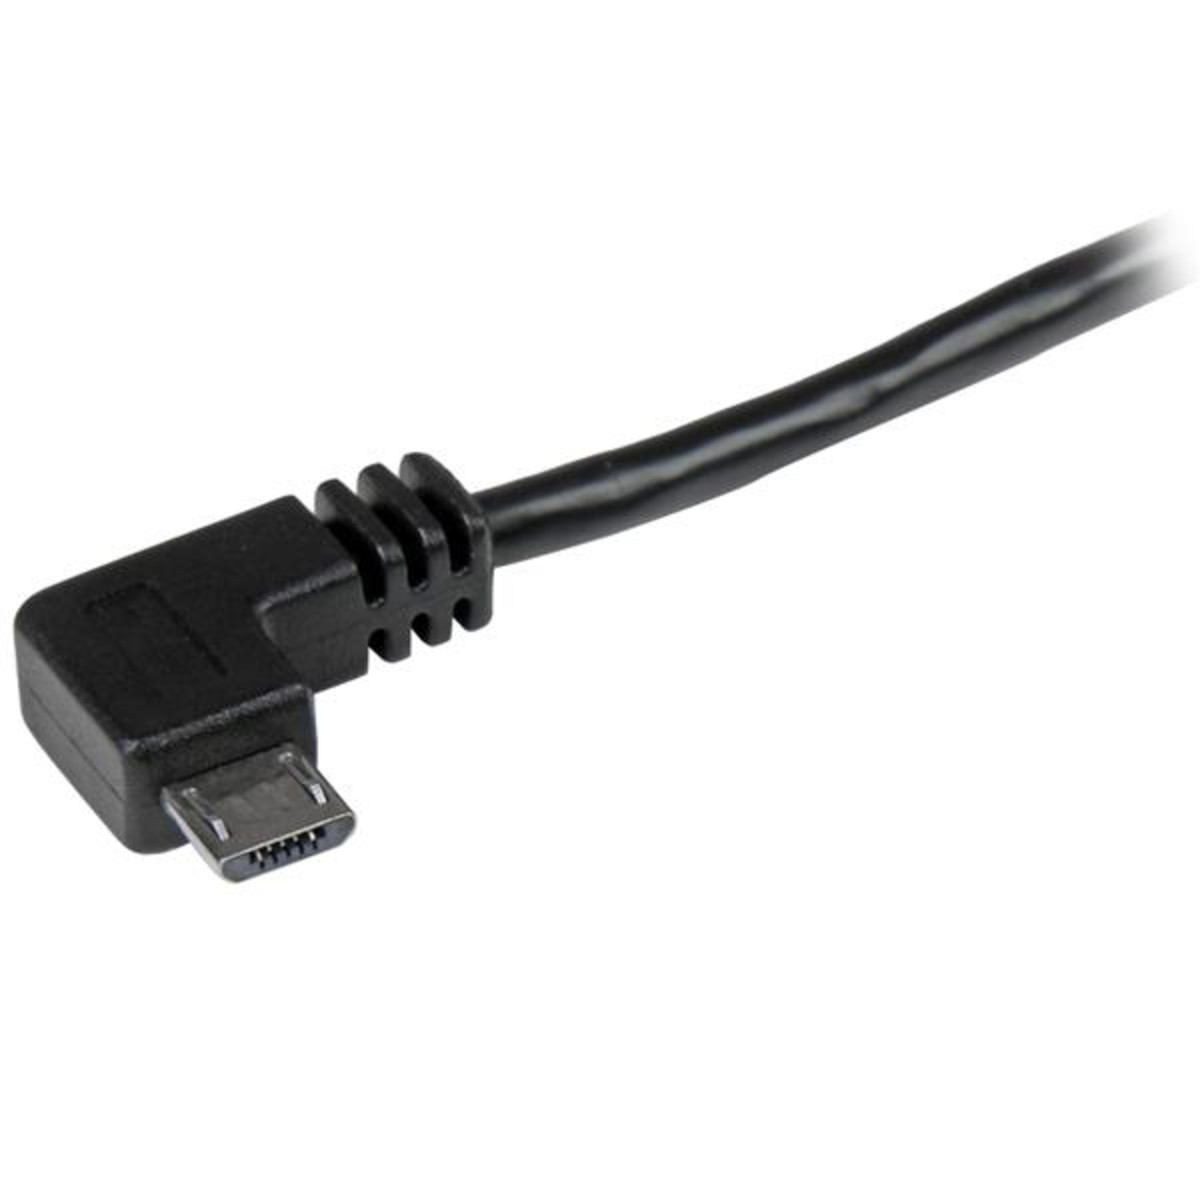 Micro-USB Cable with Connectors